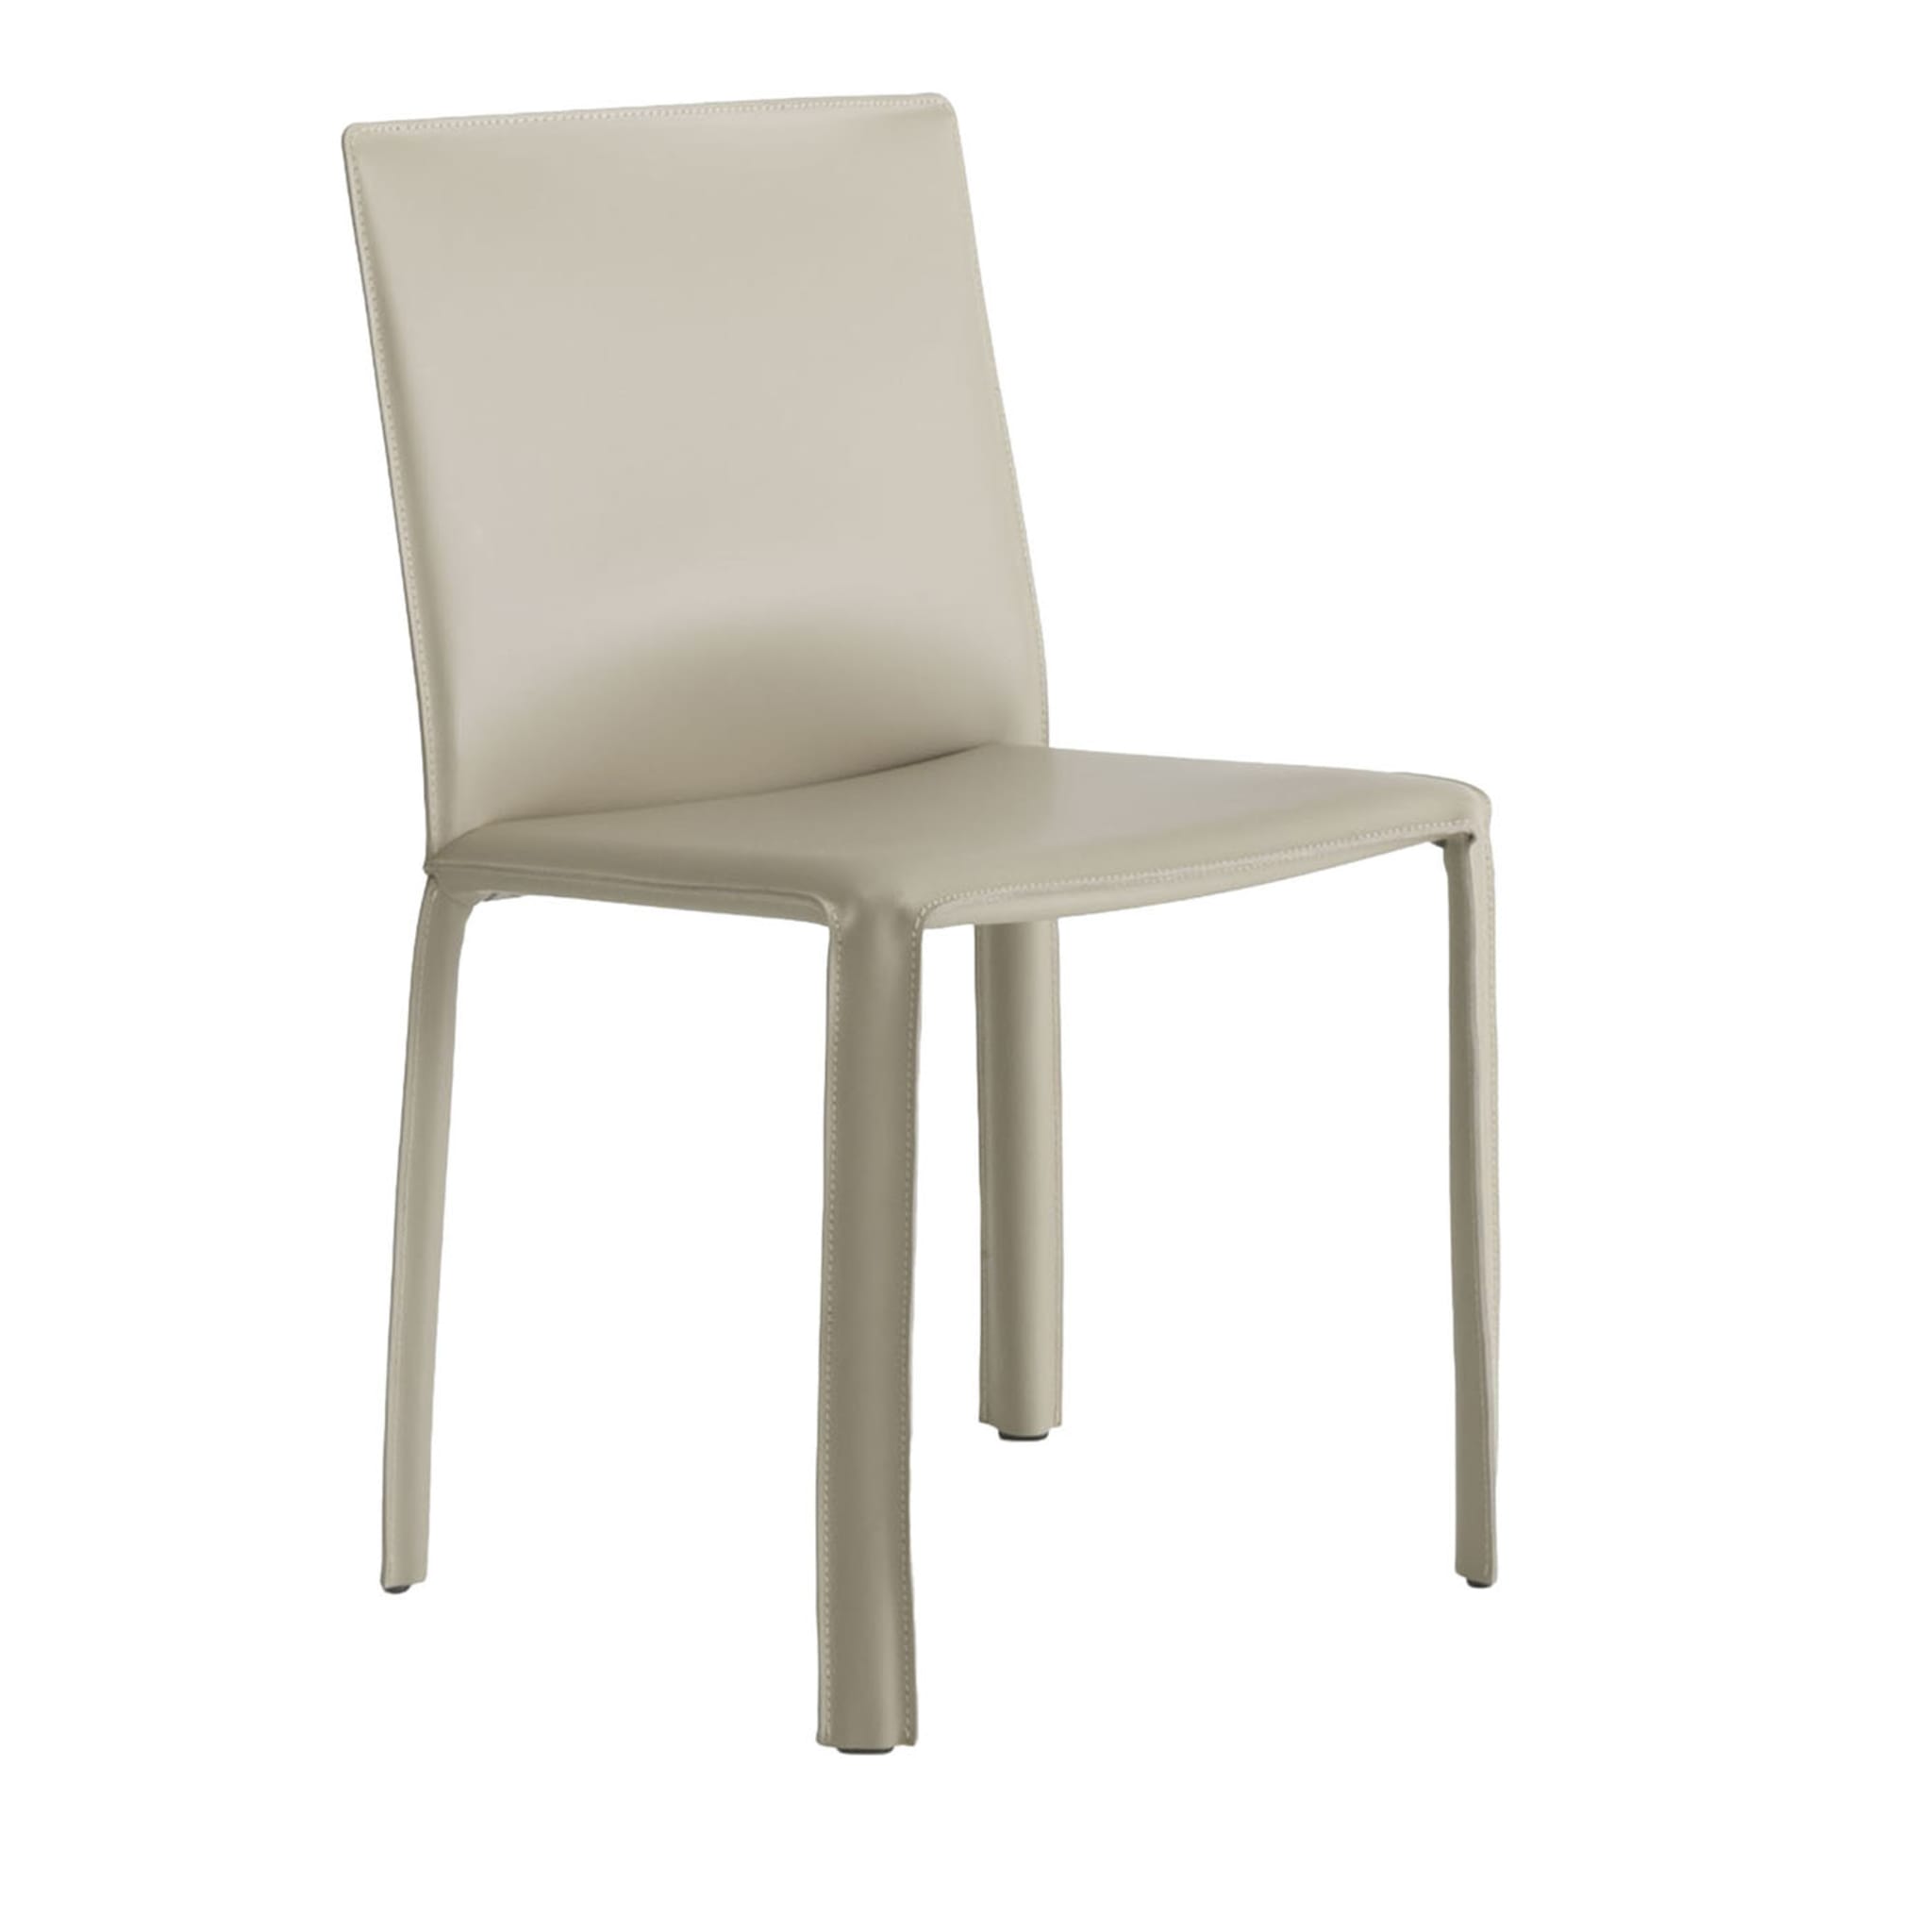 Jumpsuite Beige Leather Chair - Main view